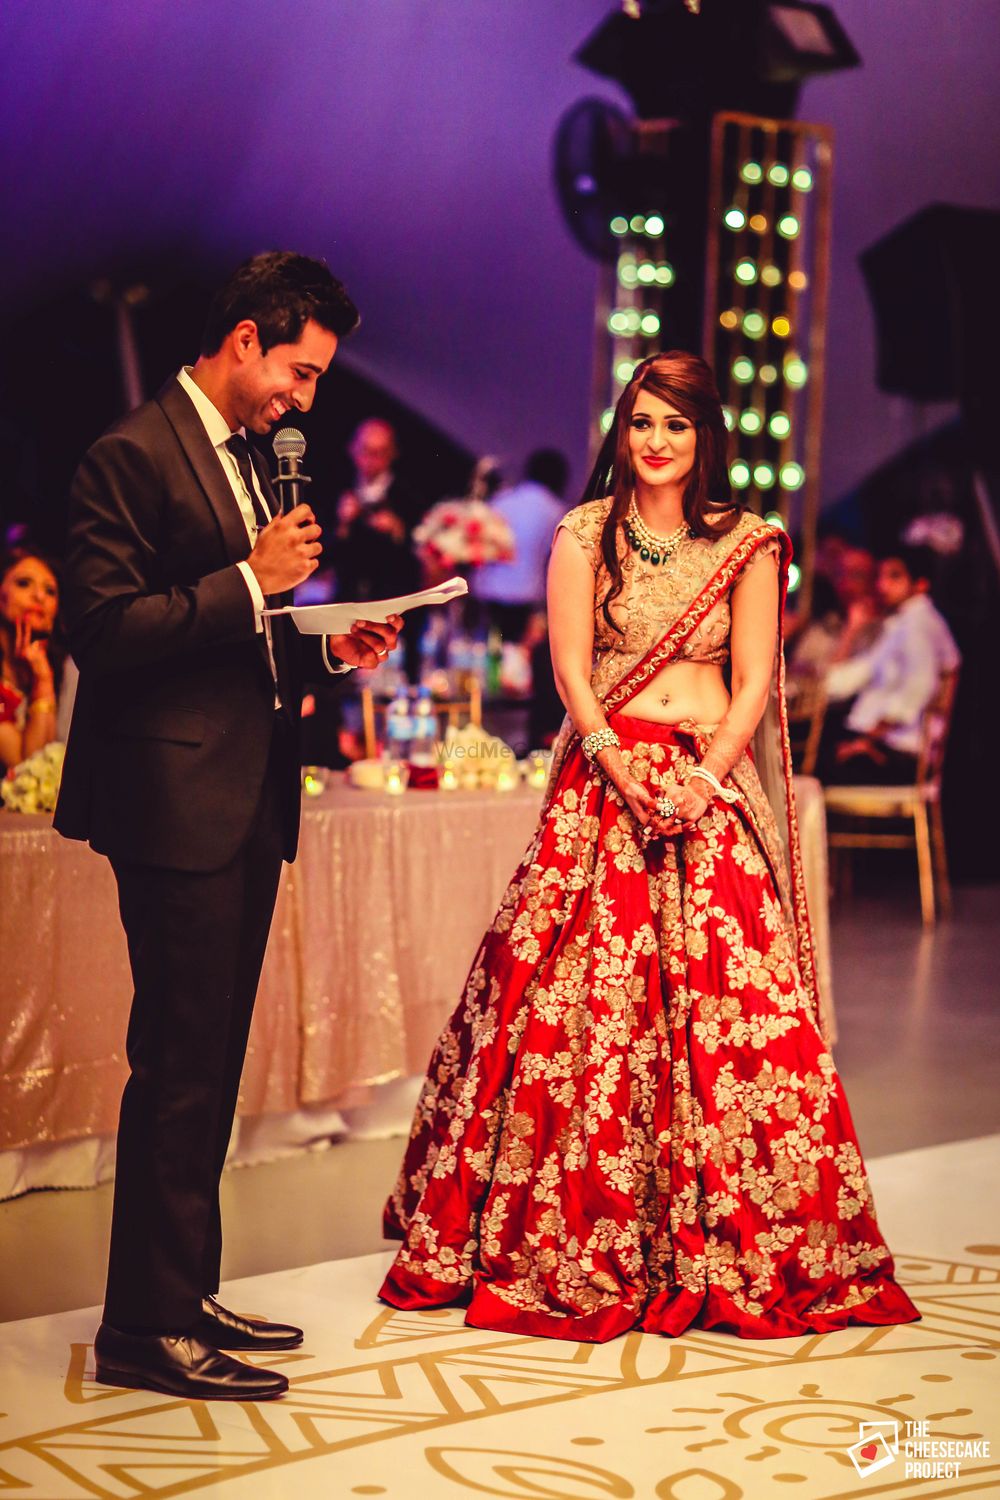 Photo of Groom Reading Out Vows to Bride in Red and Gold Lehenga